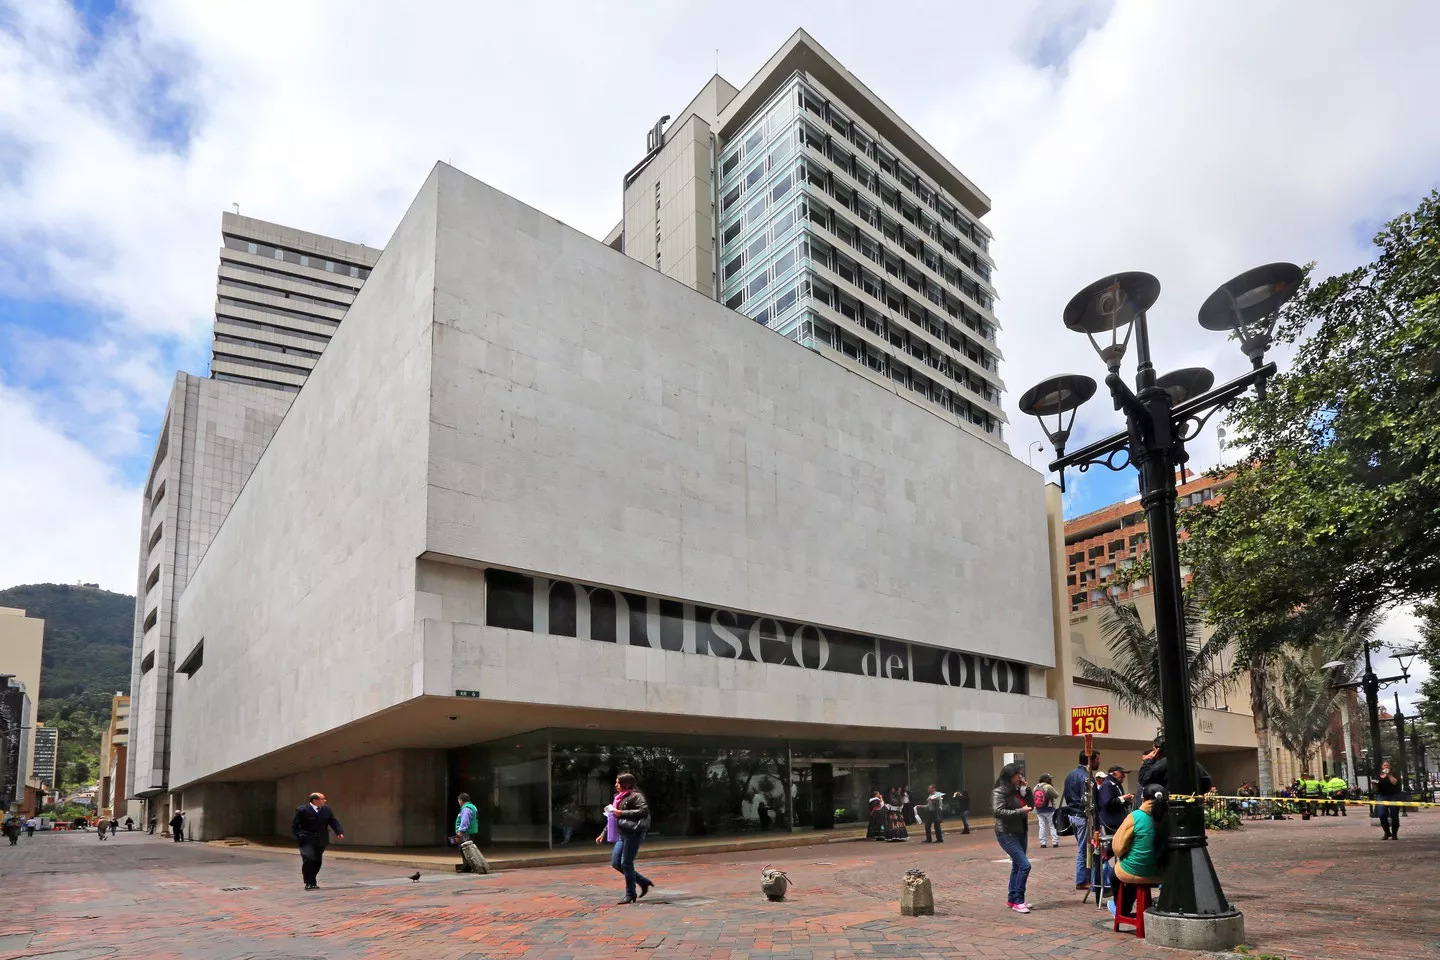 Gold Museum Bogota in Colombia, South America | Museums - Rated 4.6